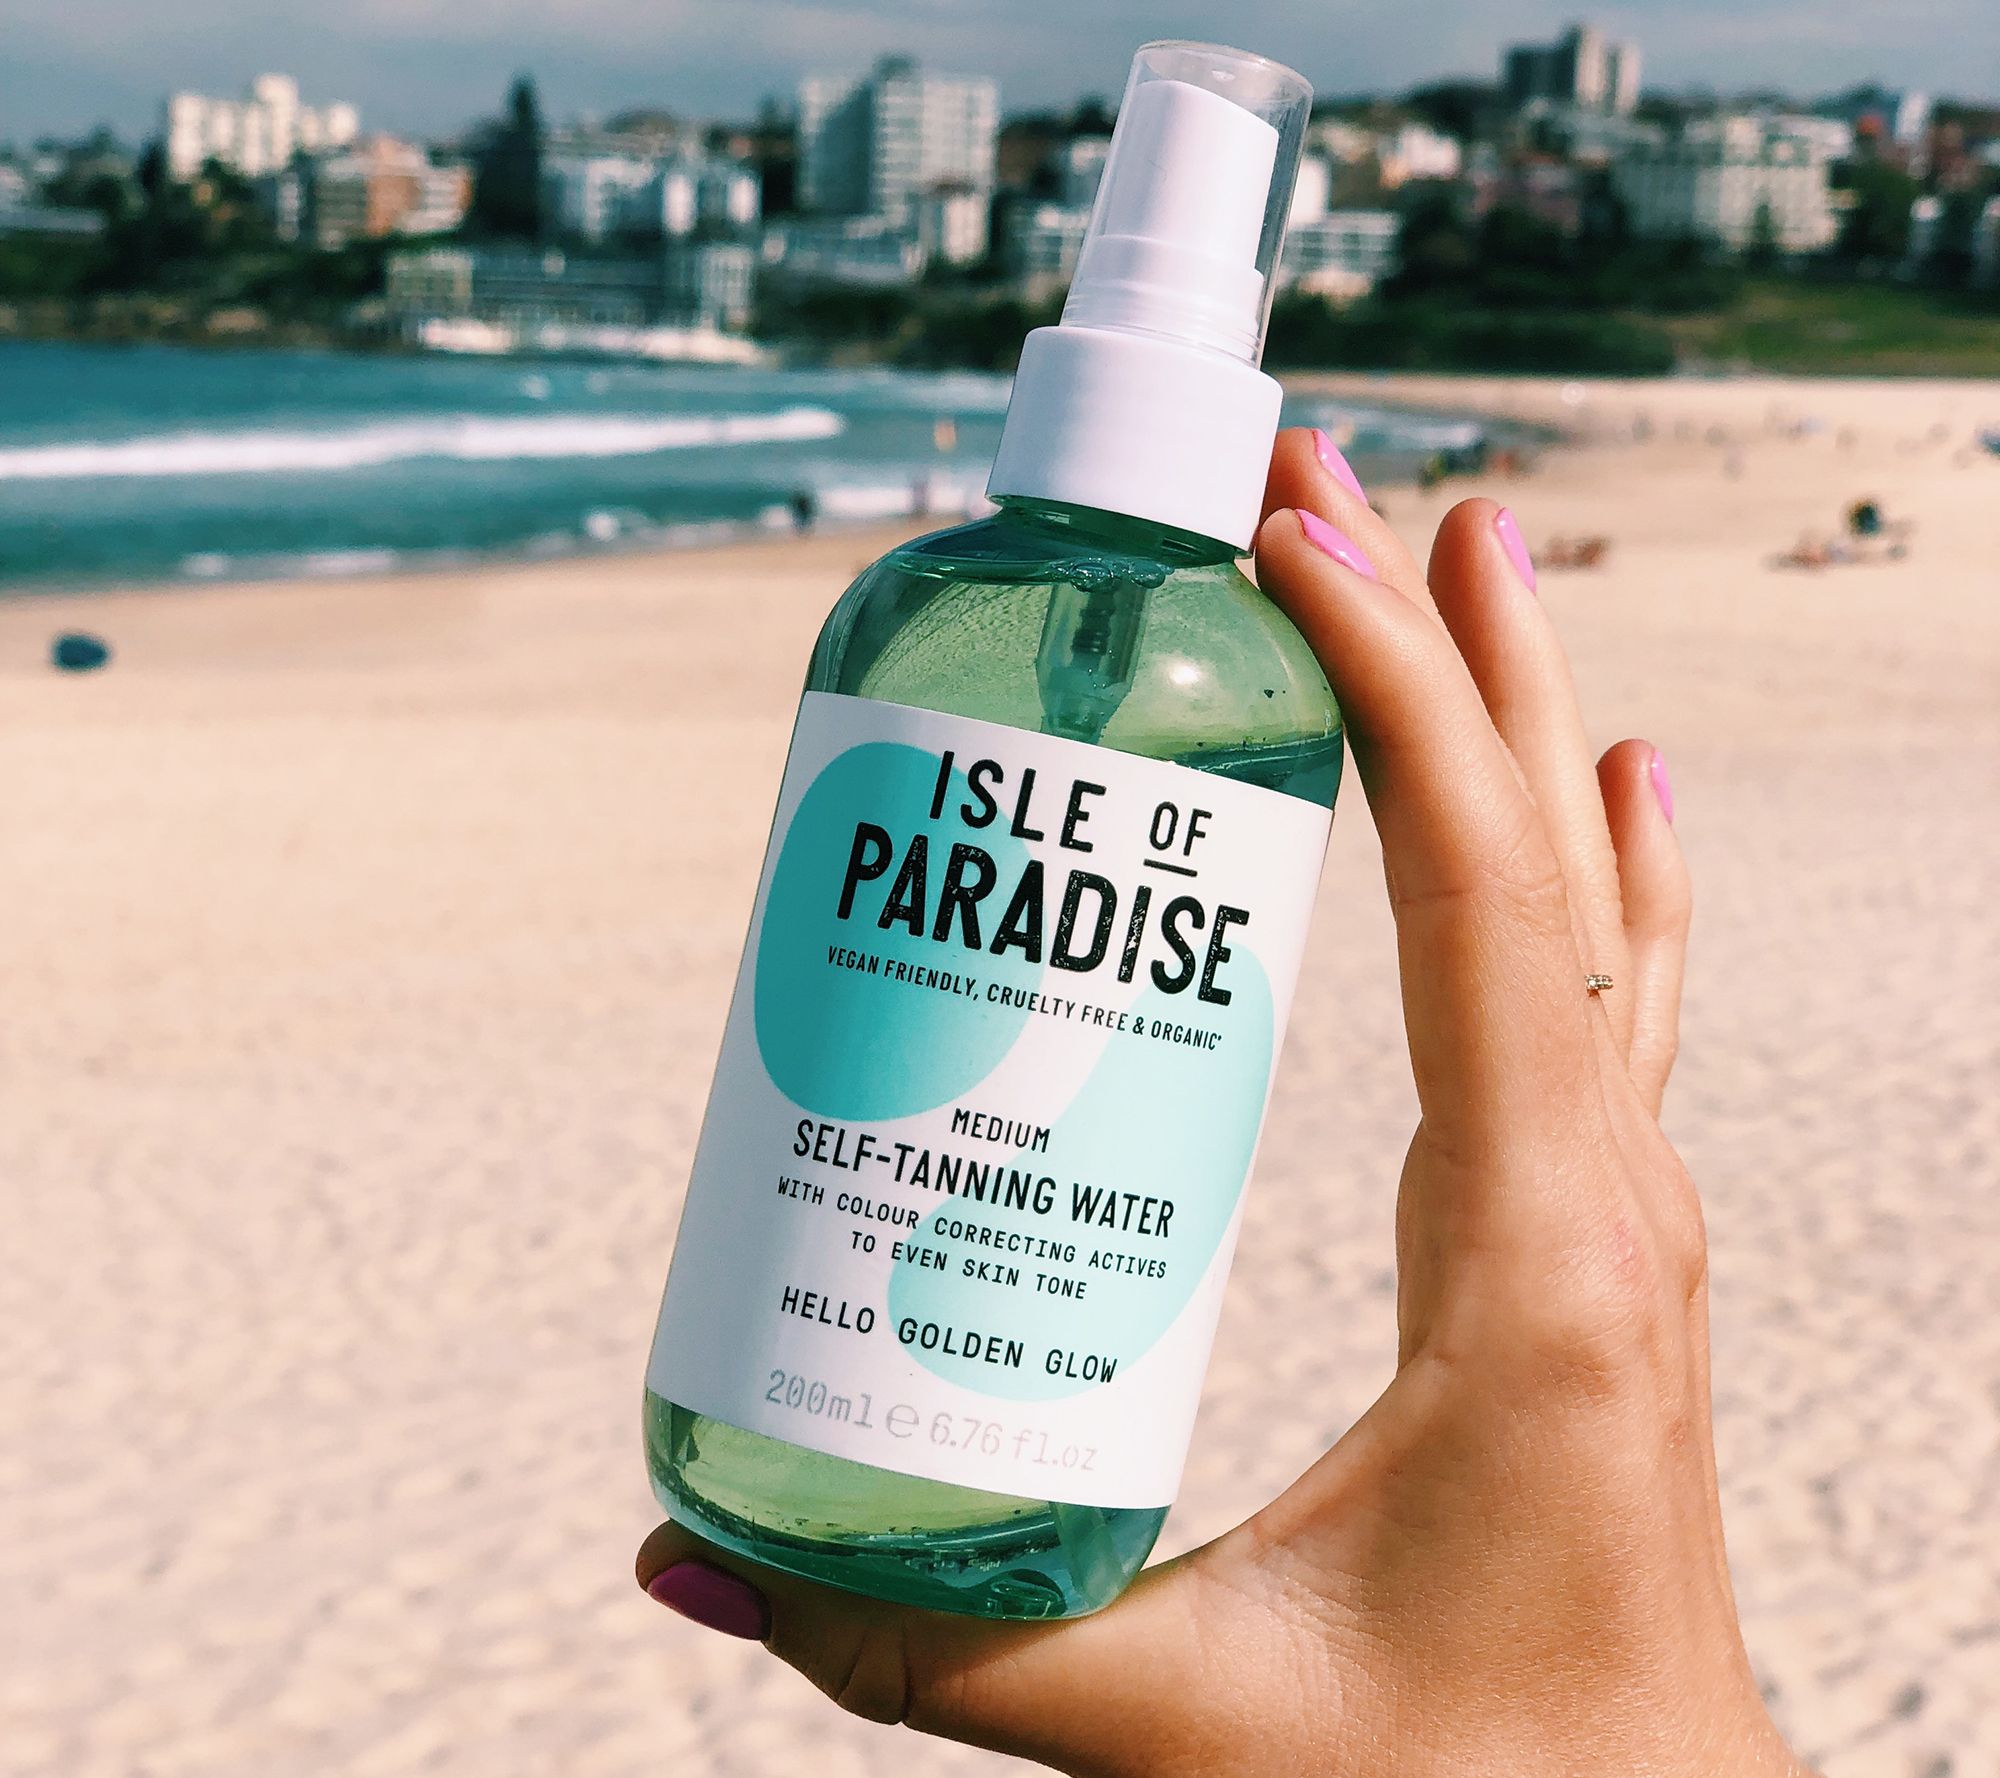 Isle of Paradise's new oil mist is on sale right now